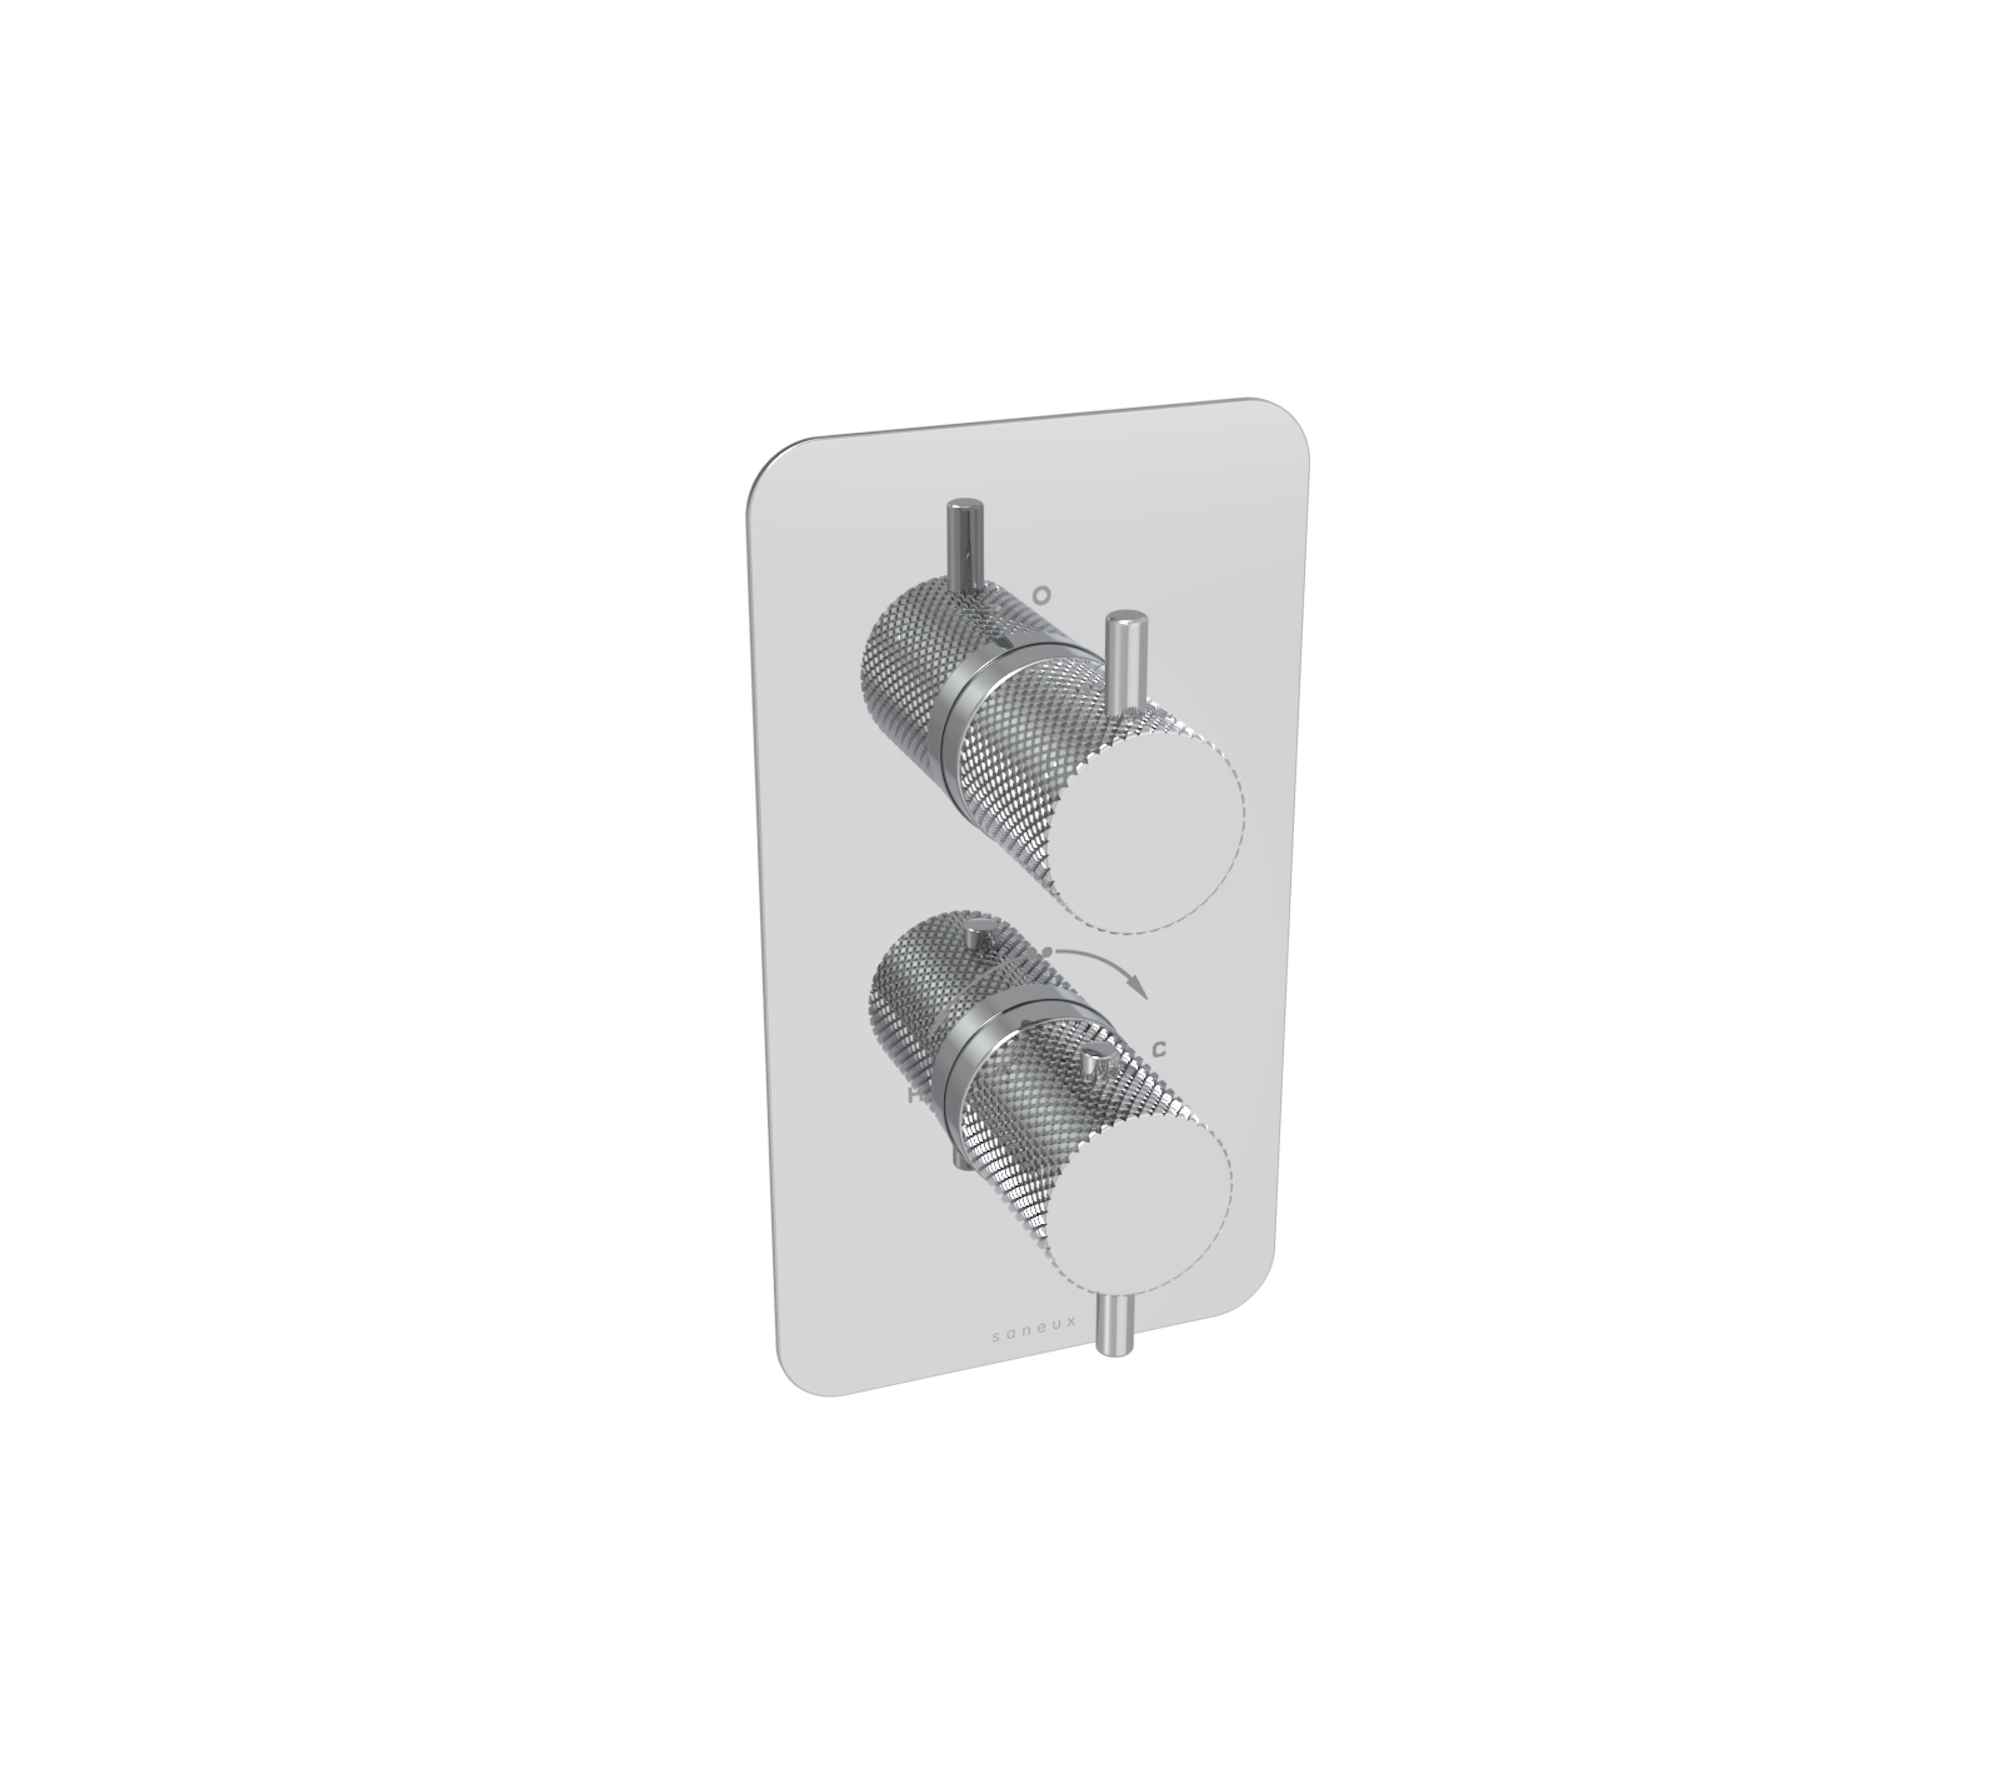 COS 1 way thermostatic shower valve kit with knurled handles - Chrome